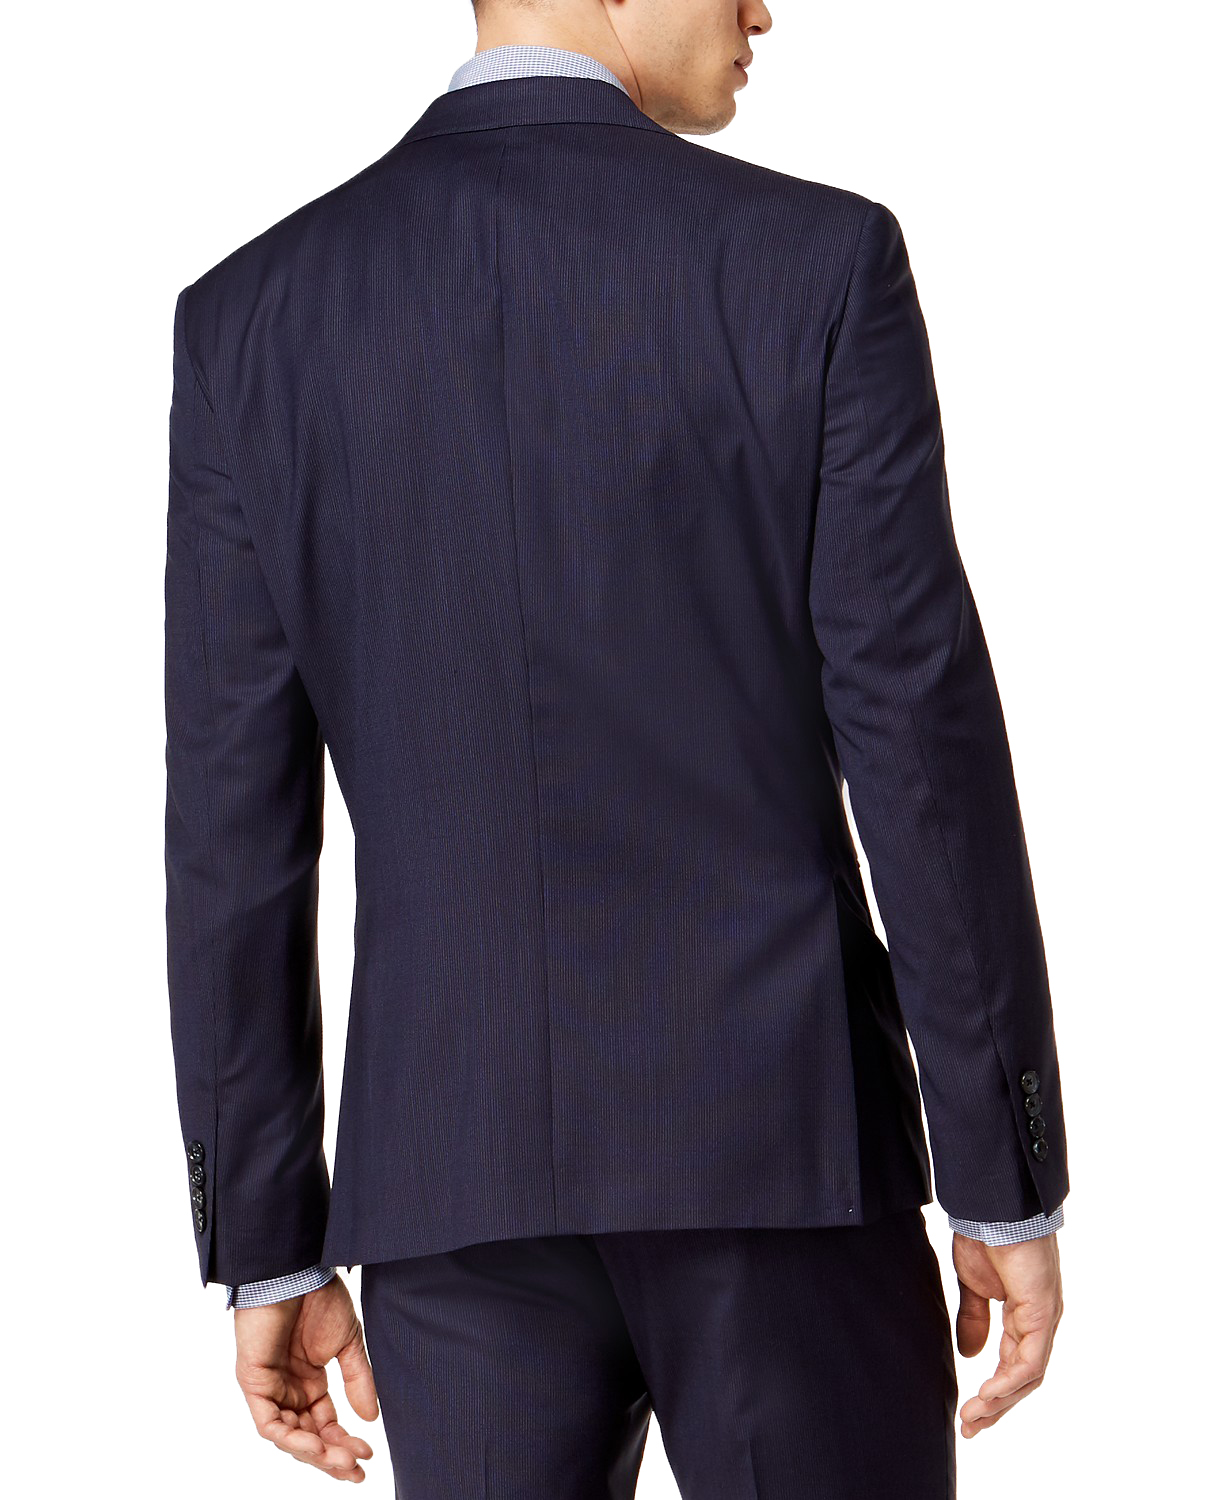 www.couturepoint.com-dkny-mens-navy-wool-modern-fit-stretch-textured-suit-jacket